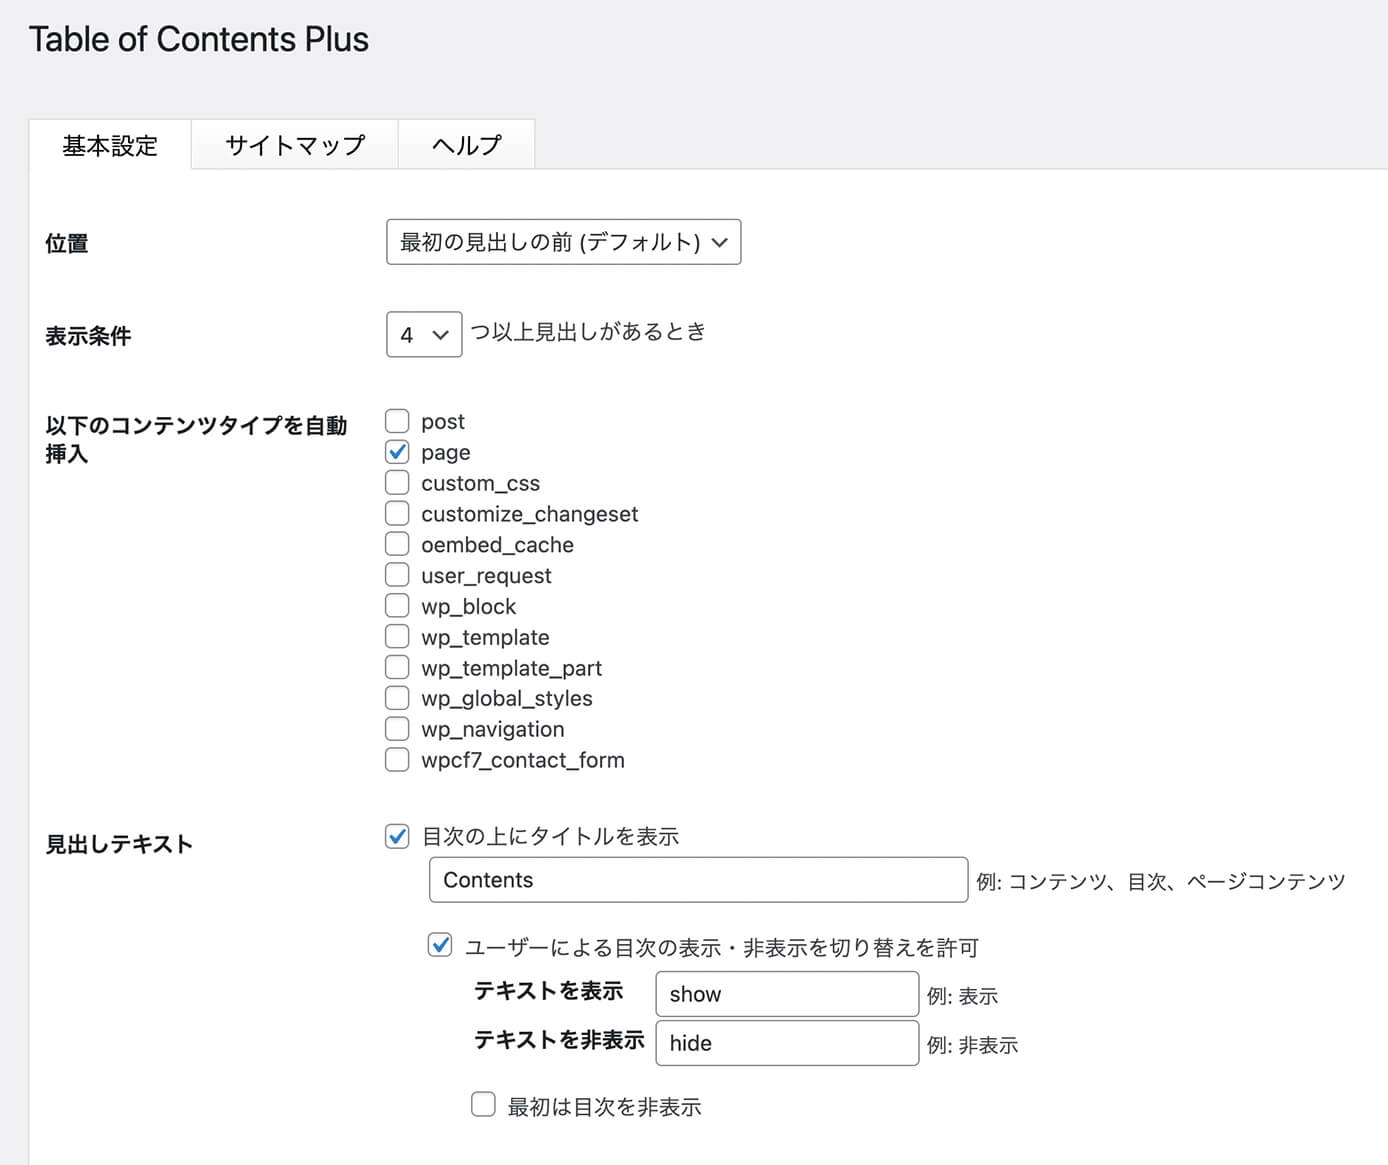 Table of Contents Plus：基本設定